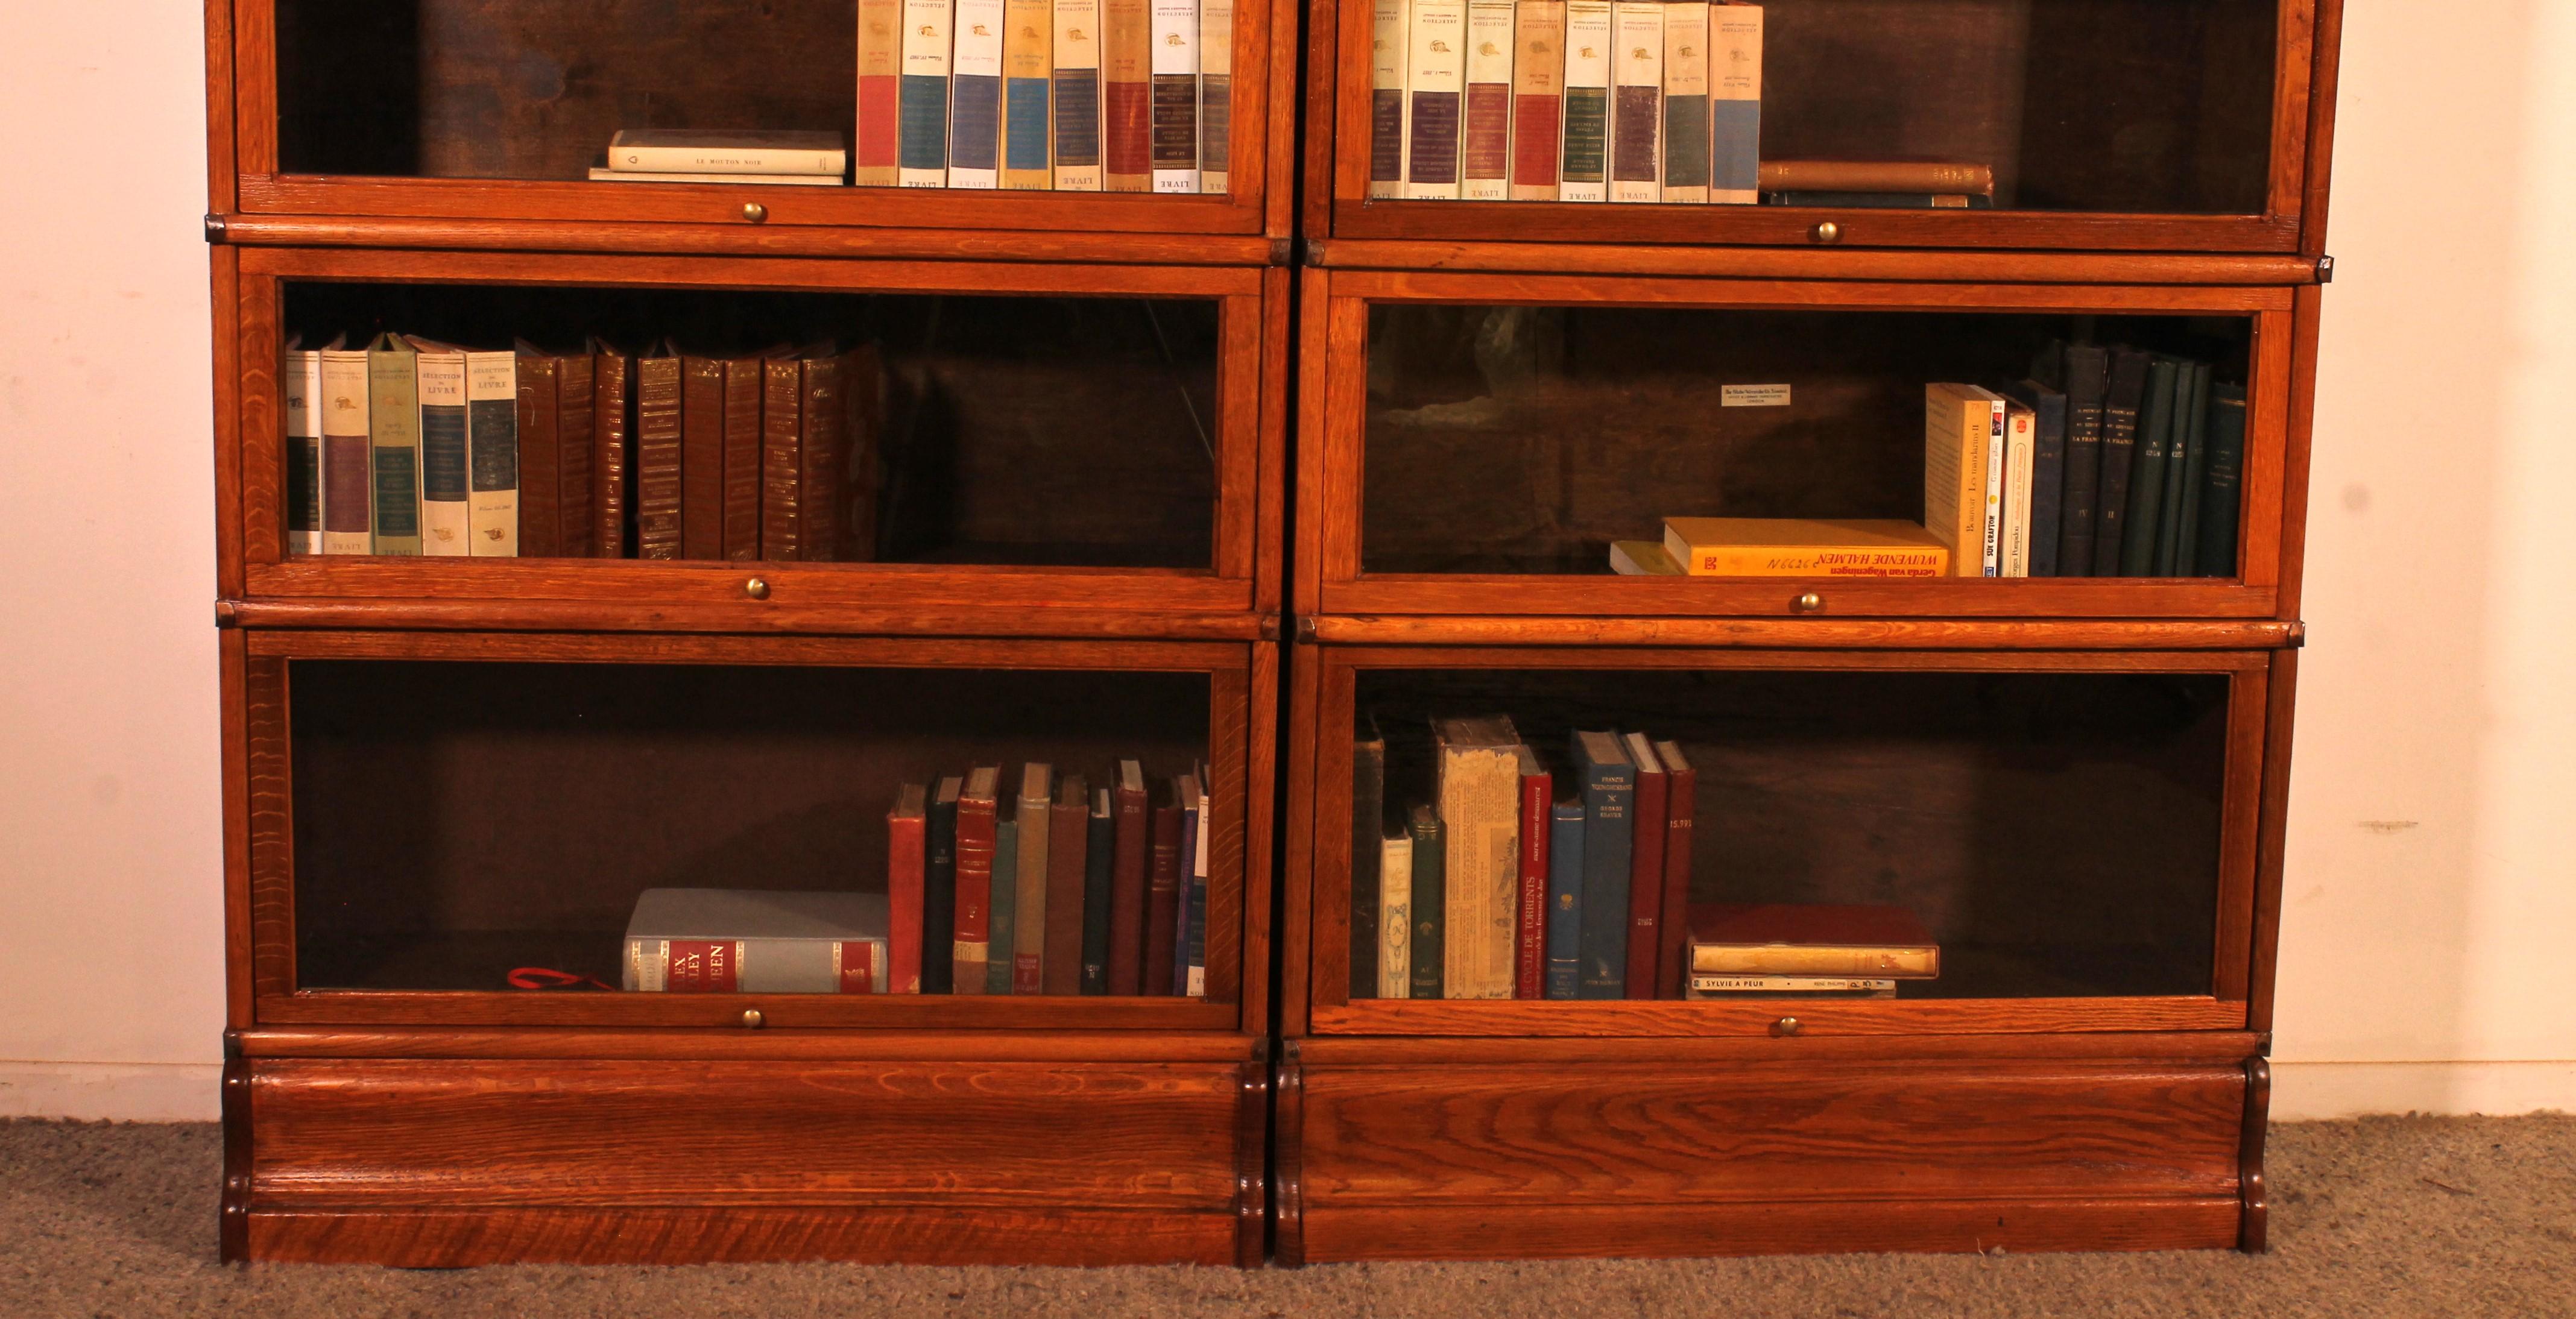 English Pair Of Globe Wernicke Bookcases In Oak -19th Century For Sale